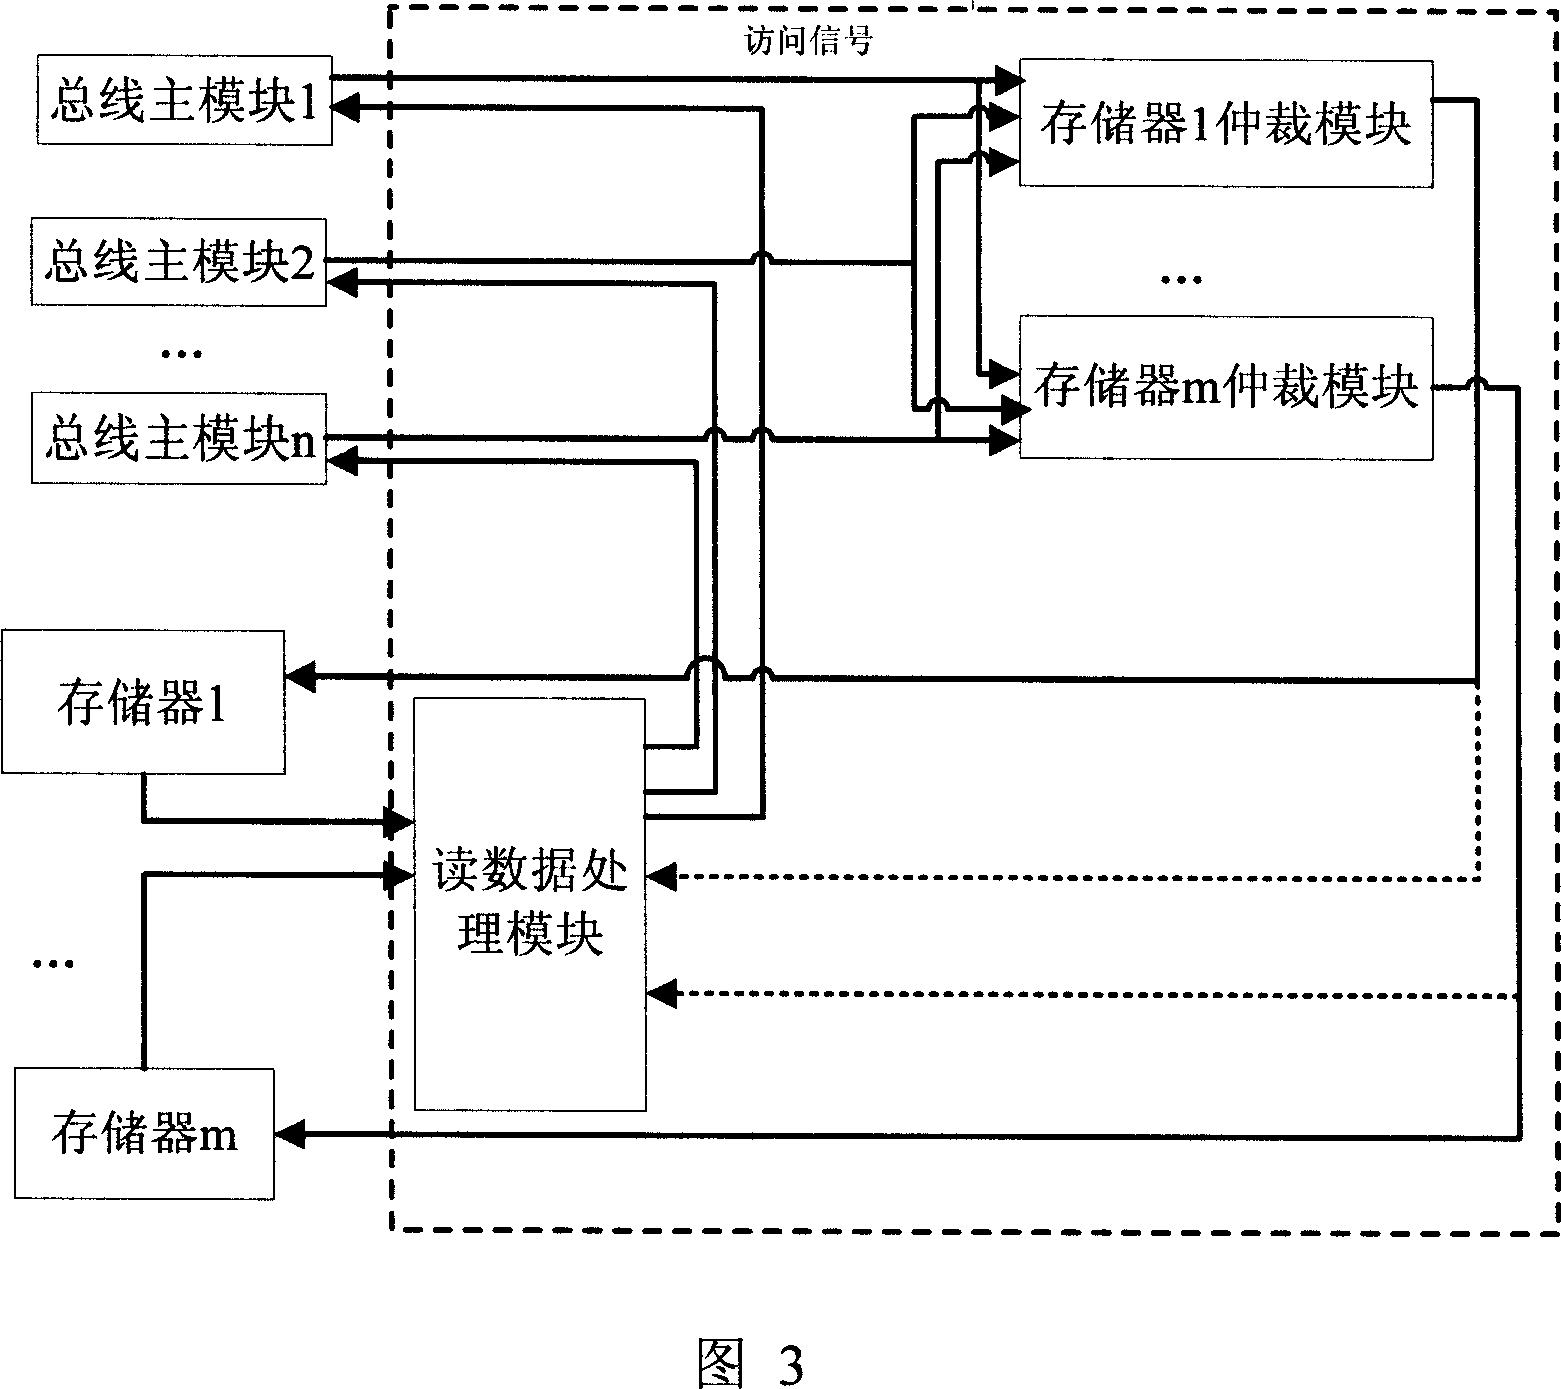 System and method for implementing memory mediation of supporting multi-bus multi-type memory device